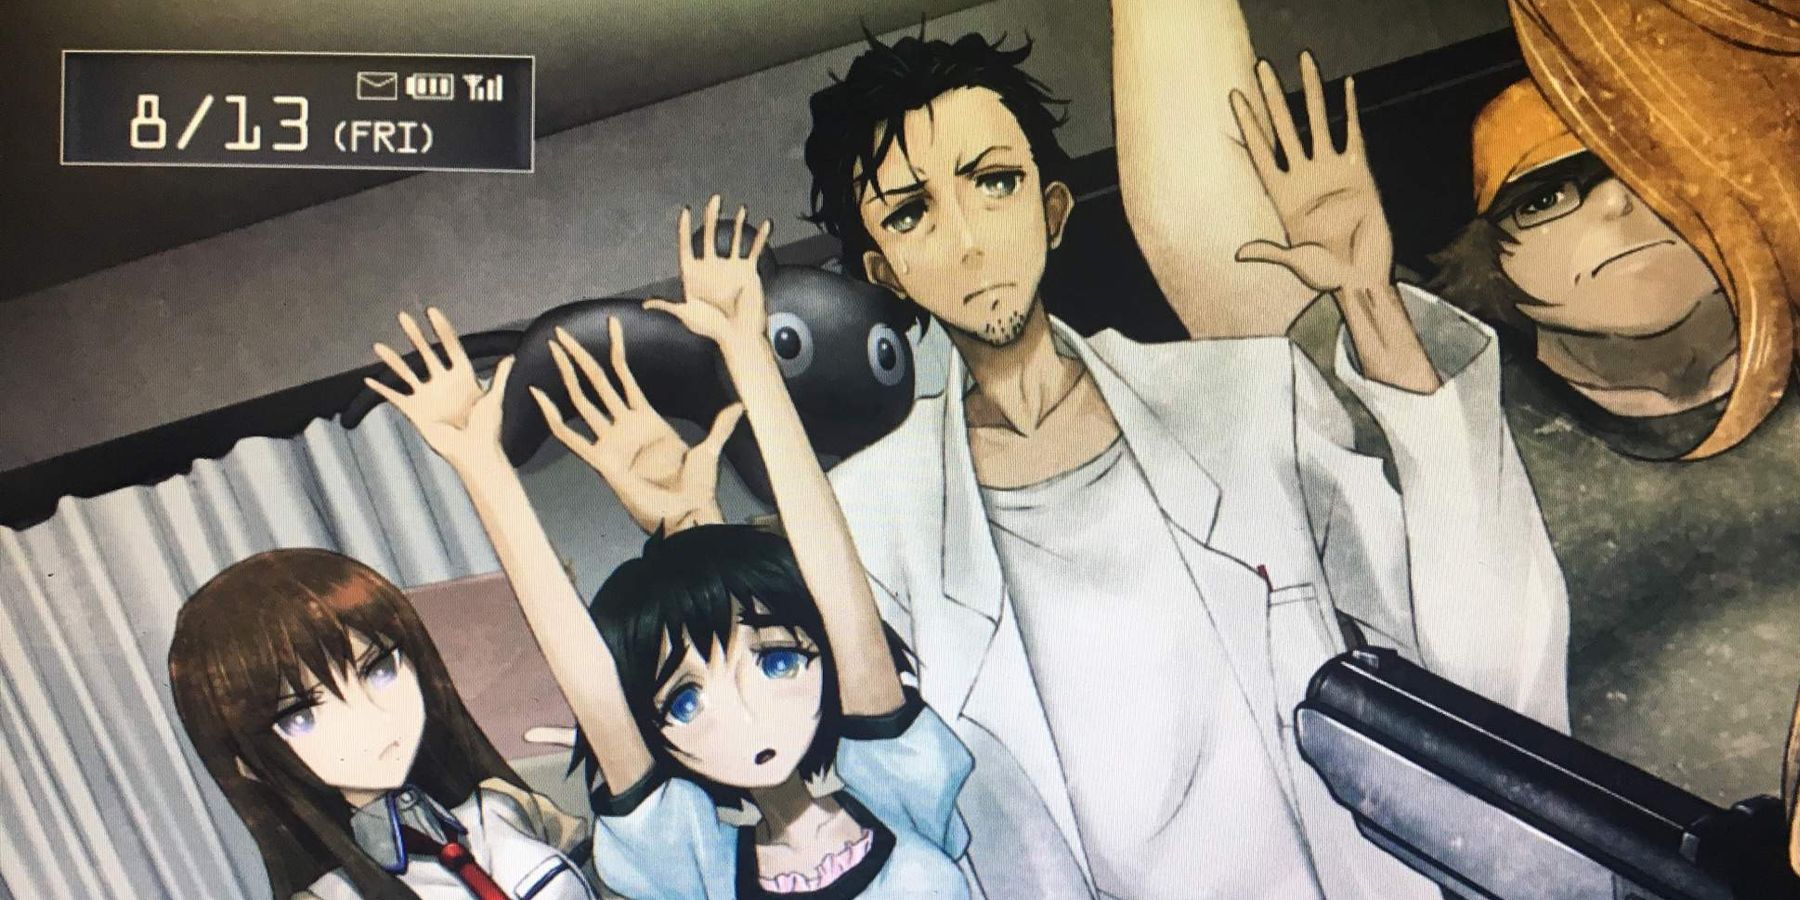 Okabe Rintarou in a stressful situation in the Steins Gate VN